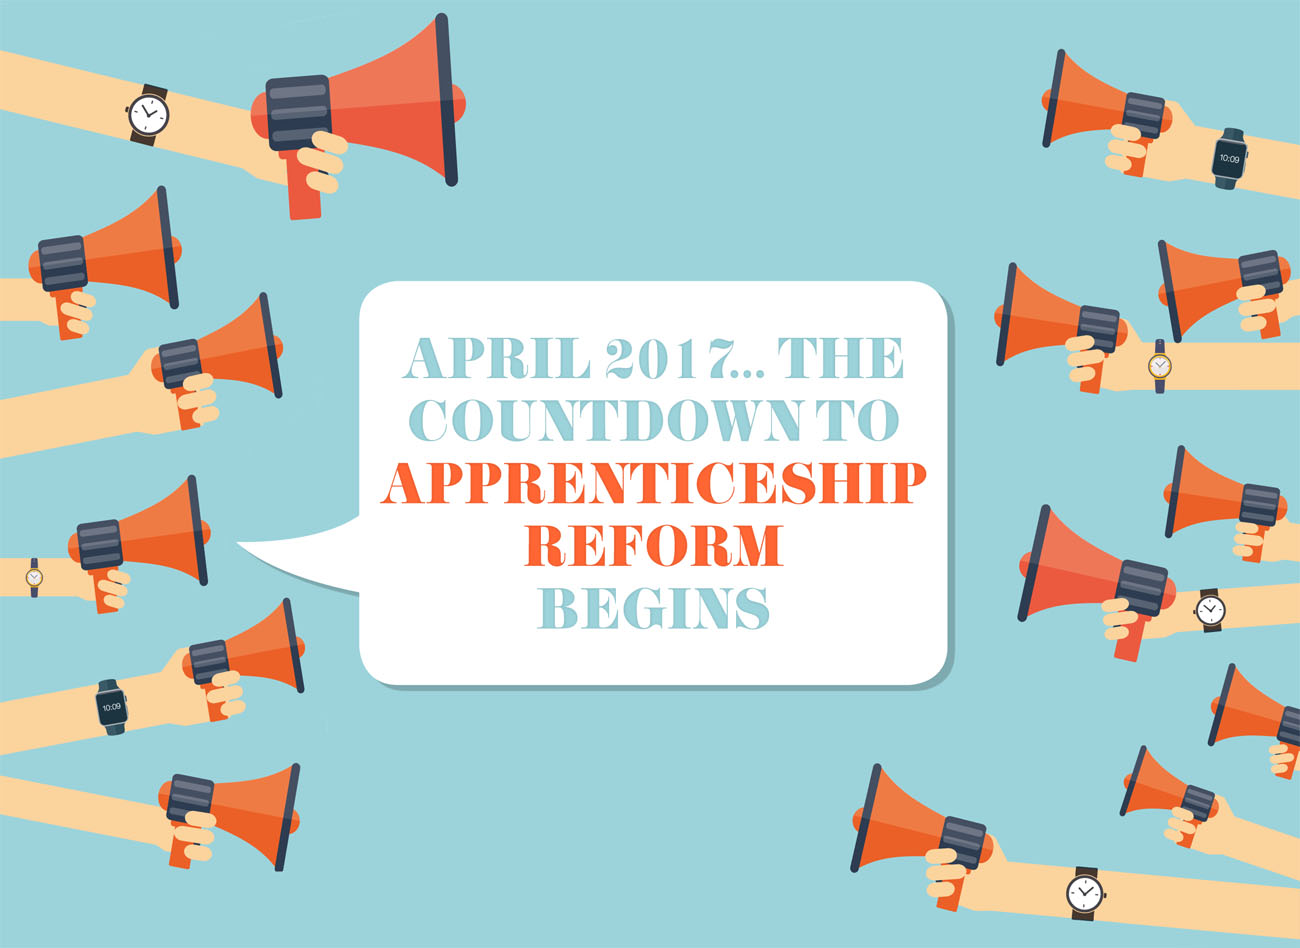 Are you aware of how the Apprenticeship Levy will affect your business? 